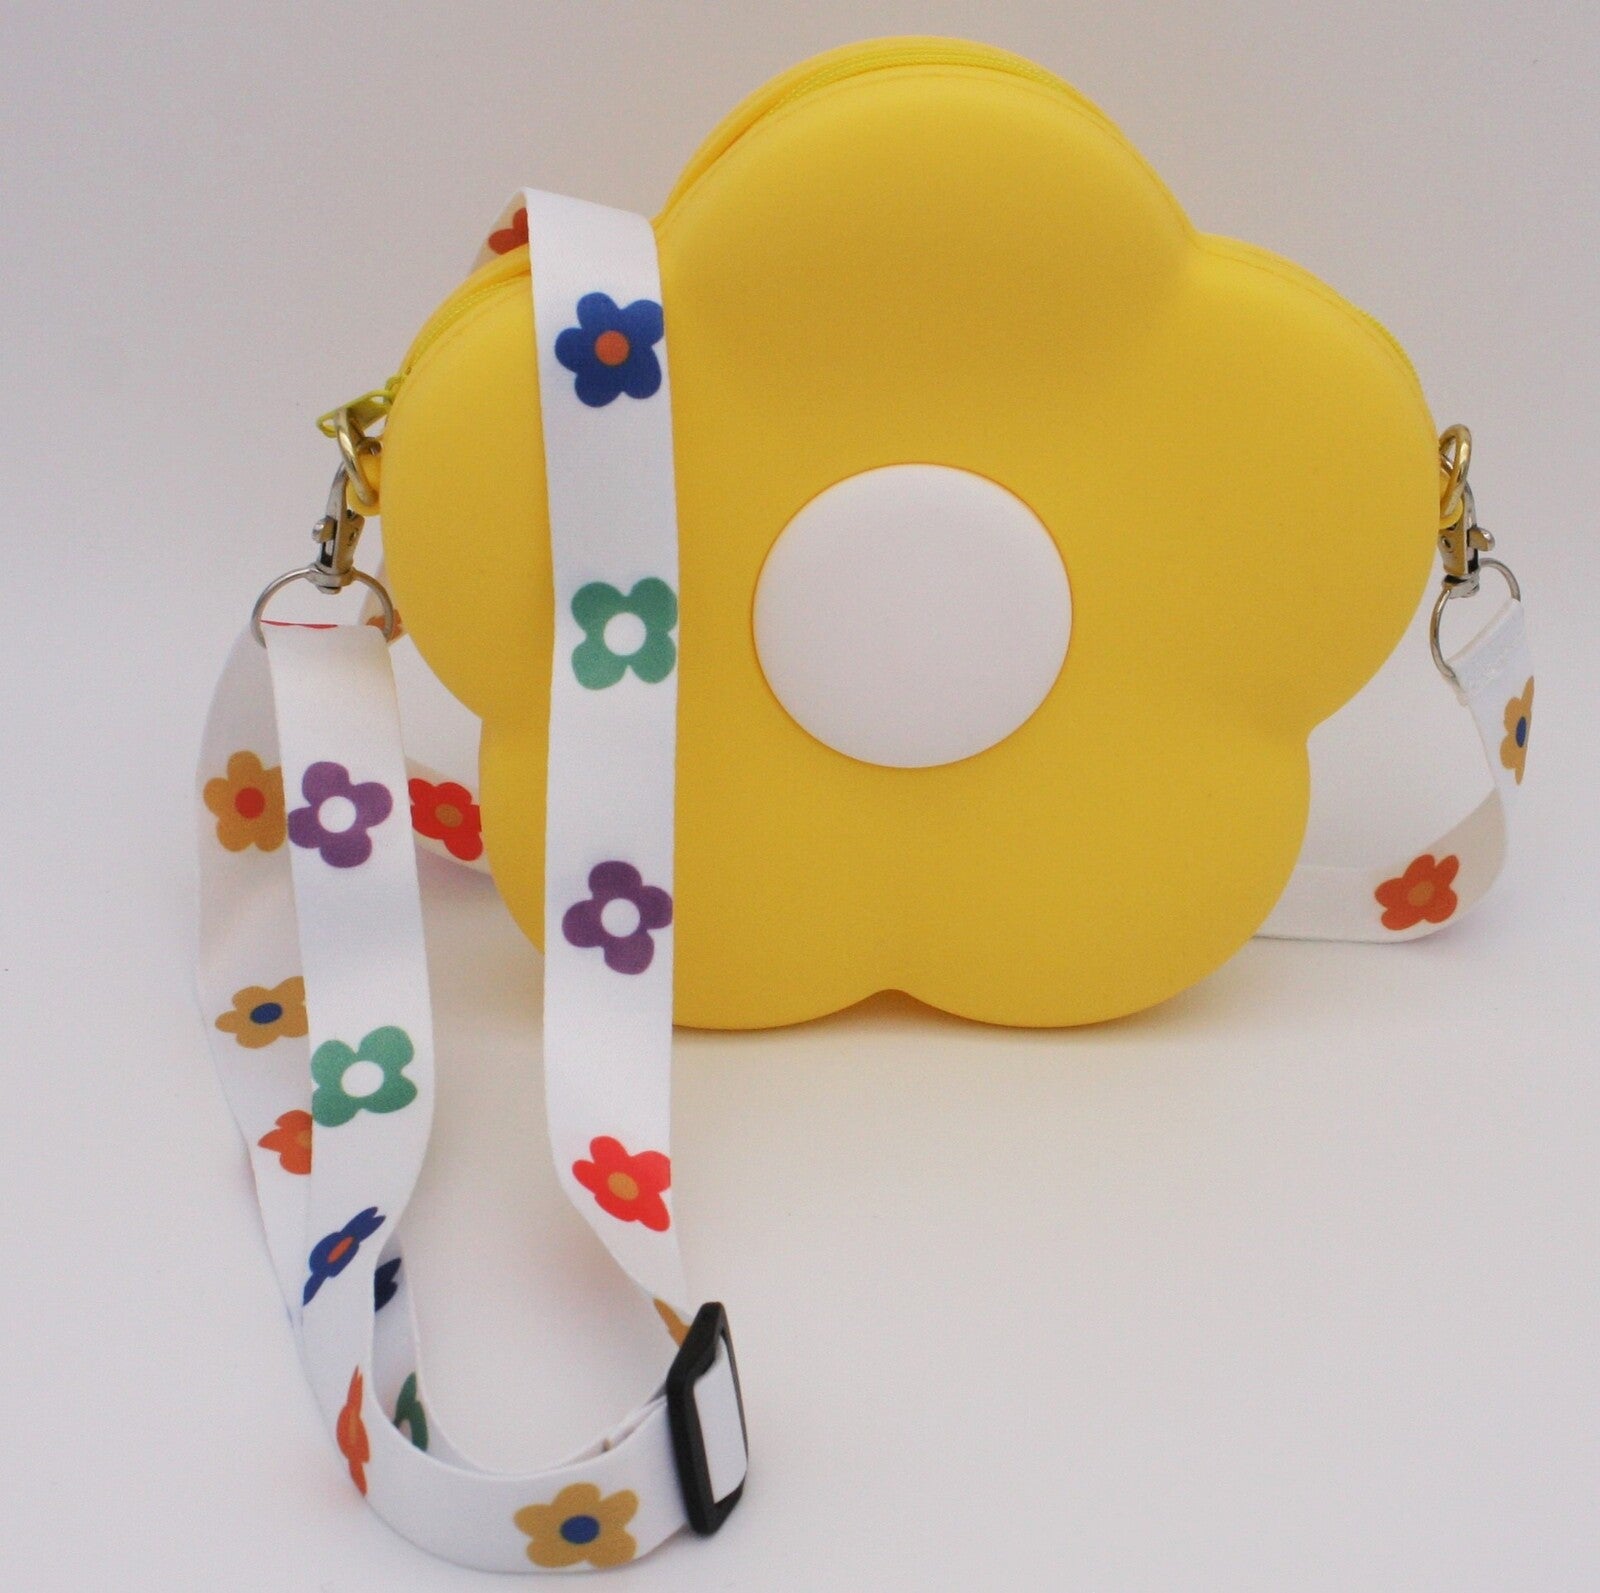 Standing bright yellow daisy bag with colourful daisies on the white strap